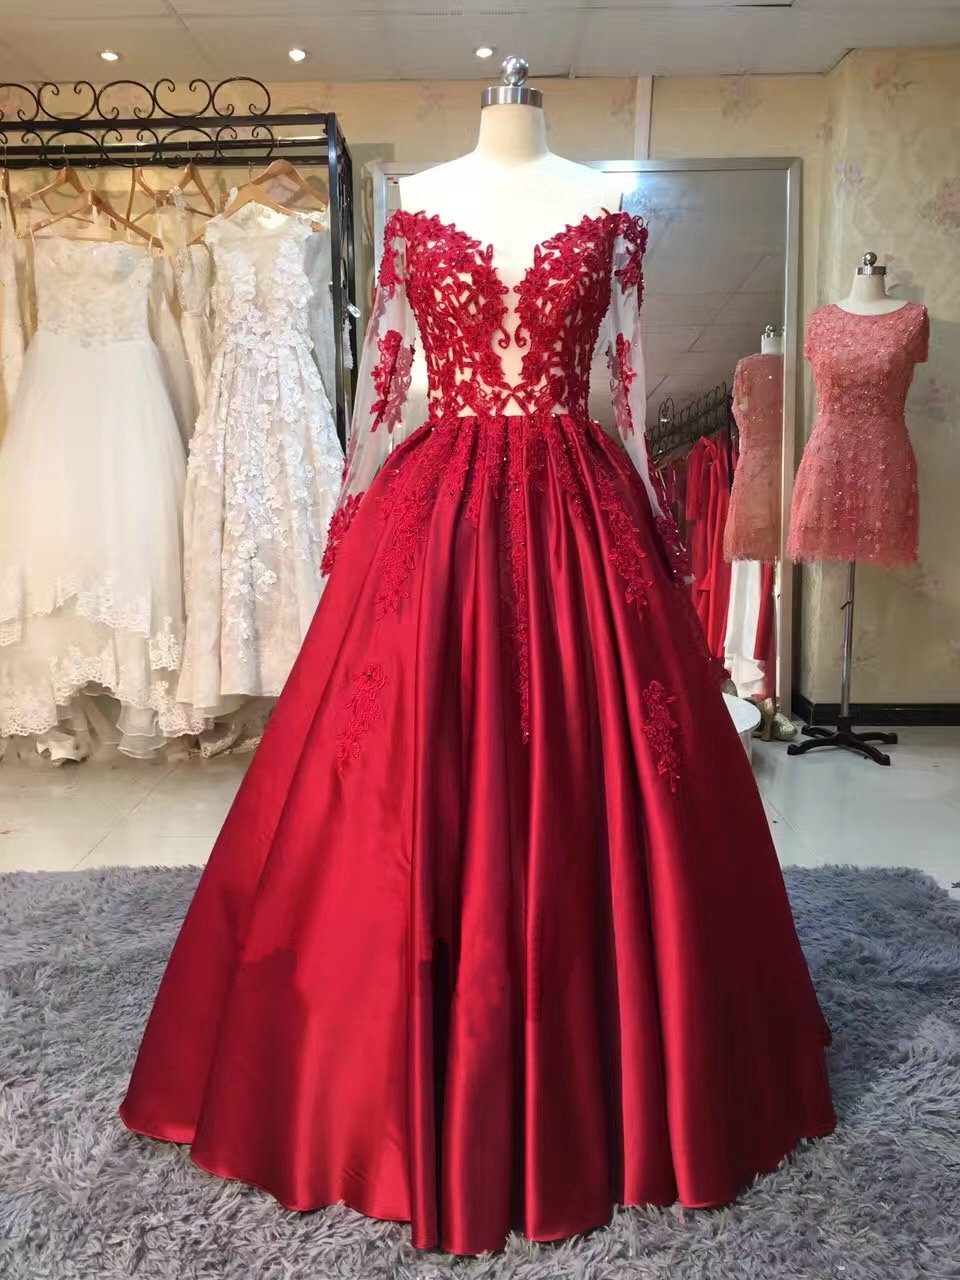 Burgundy Long Sleeve Long Prom Dresses,Red Lace Appliques Prom Dress,Evening Dresses.R1161